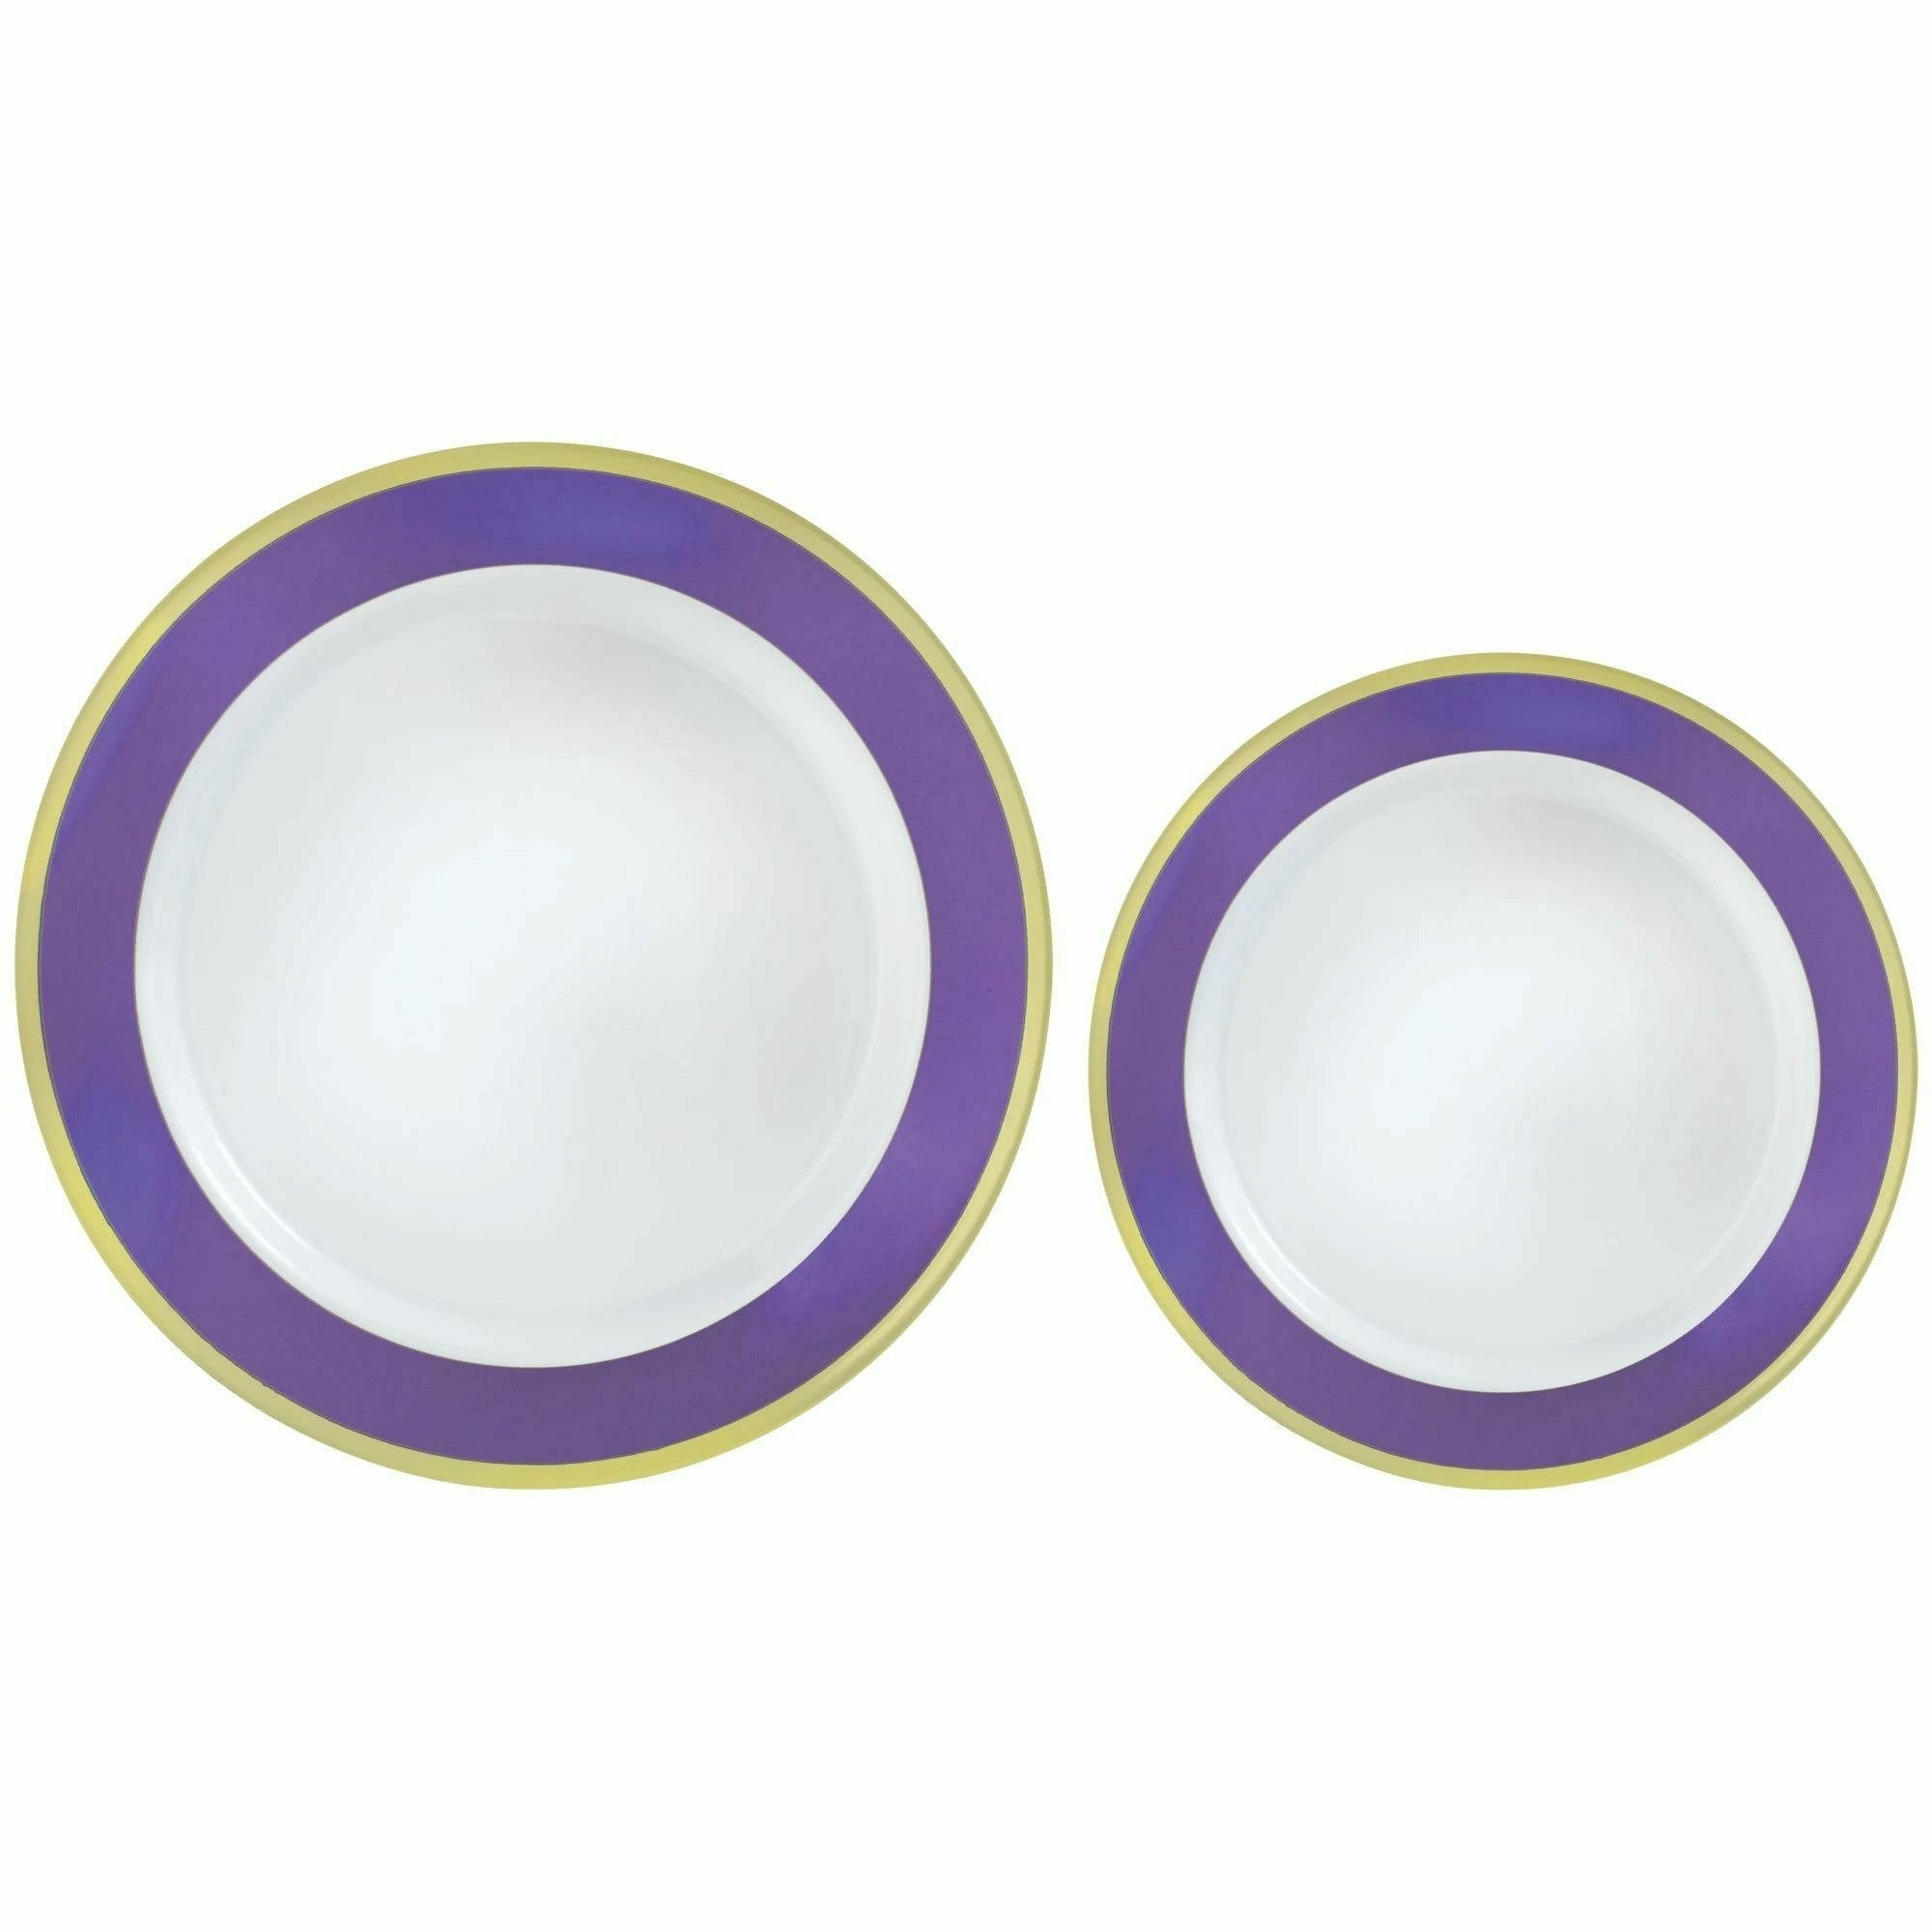 Amscan BASIC New Purple - Multipack, Hot Stamped Plastic Border Plates